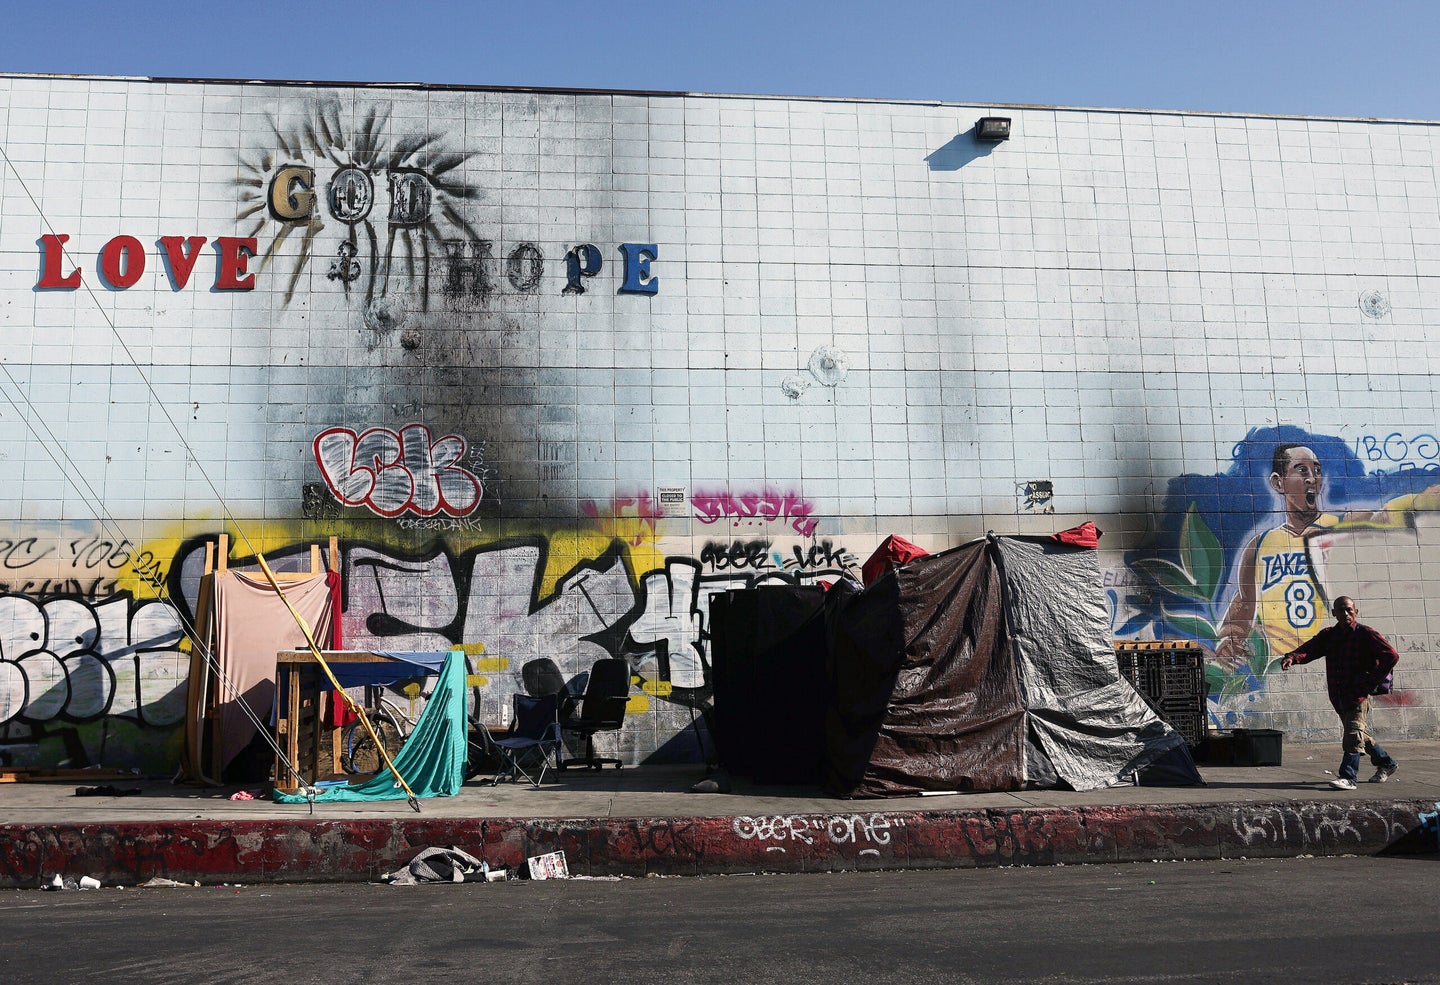 LOS ANGELES, CALIFORNIA - SEPTEMBER 28: A person walks past a homeless encampment in the Skid Row community on September 28, 2023 in Los Angeles, California. State and local lawmakers, both Republicans and Democrats, are seeking to overturn lower court decisions which currently block their power to clear encampments with unhoused people. Dozens of leaders, many from Western states including California, have turned to the Supreme Court to overturn the rulings. Skid Row is home to thousands of people who either live on the streets or in shelters. (Photo by Mario Tama/Getty Images)